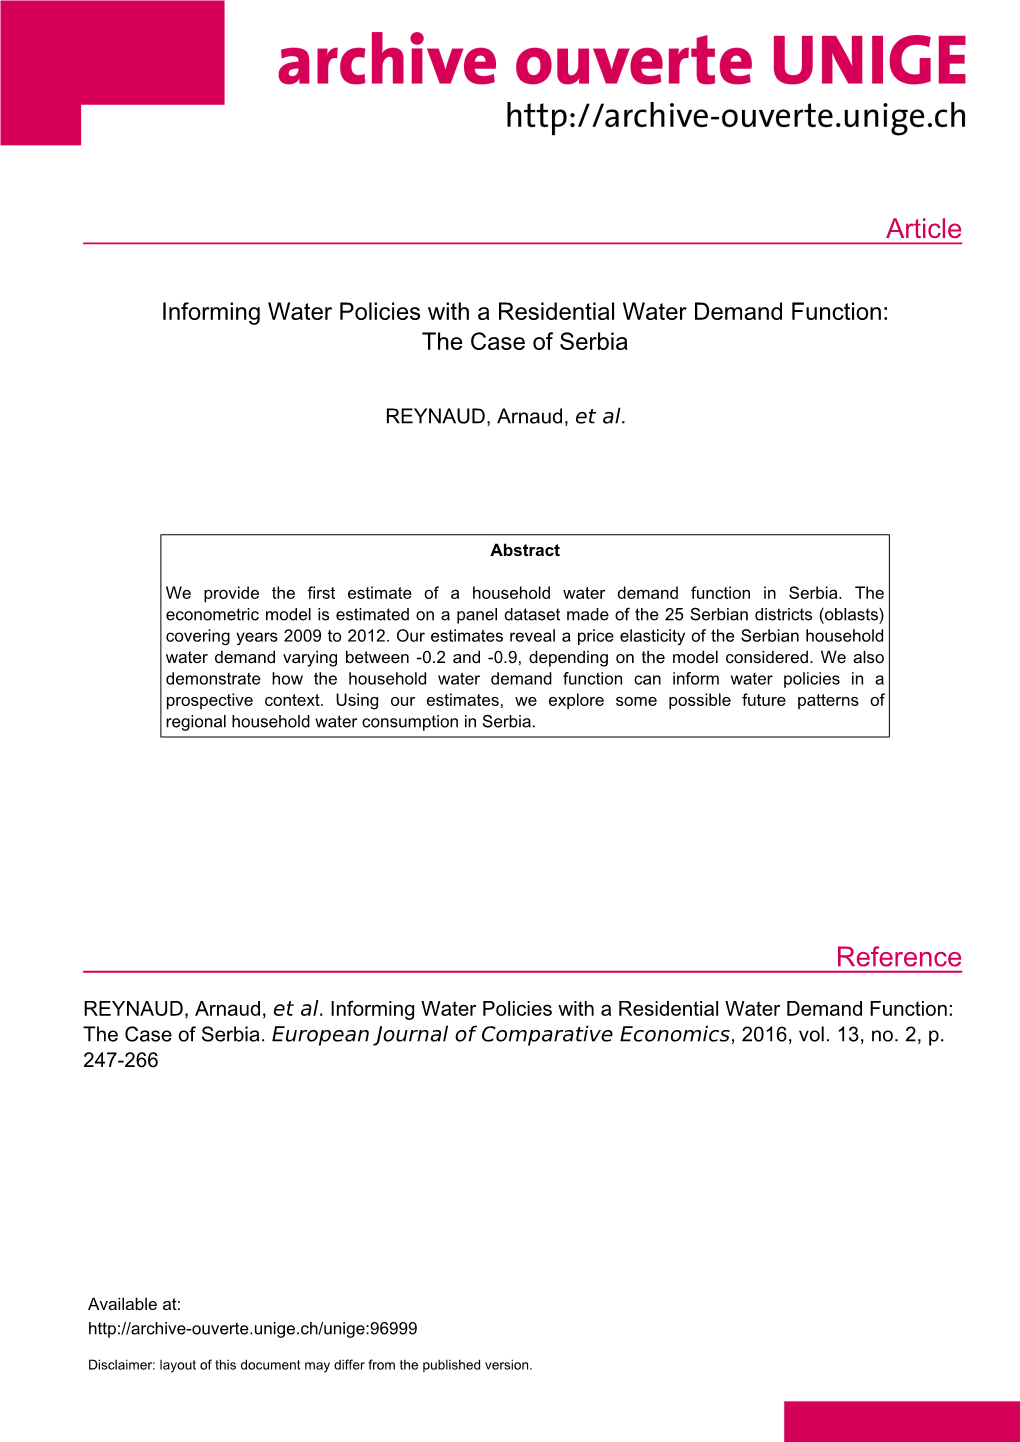 Informing Water Policies with a Residential Water Demand Function: the Case of Serbia